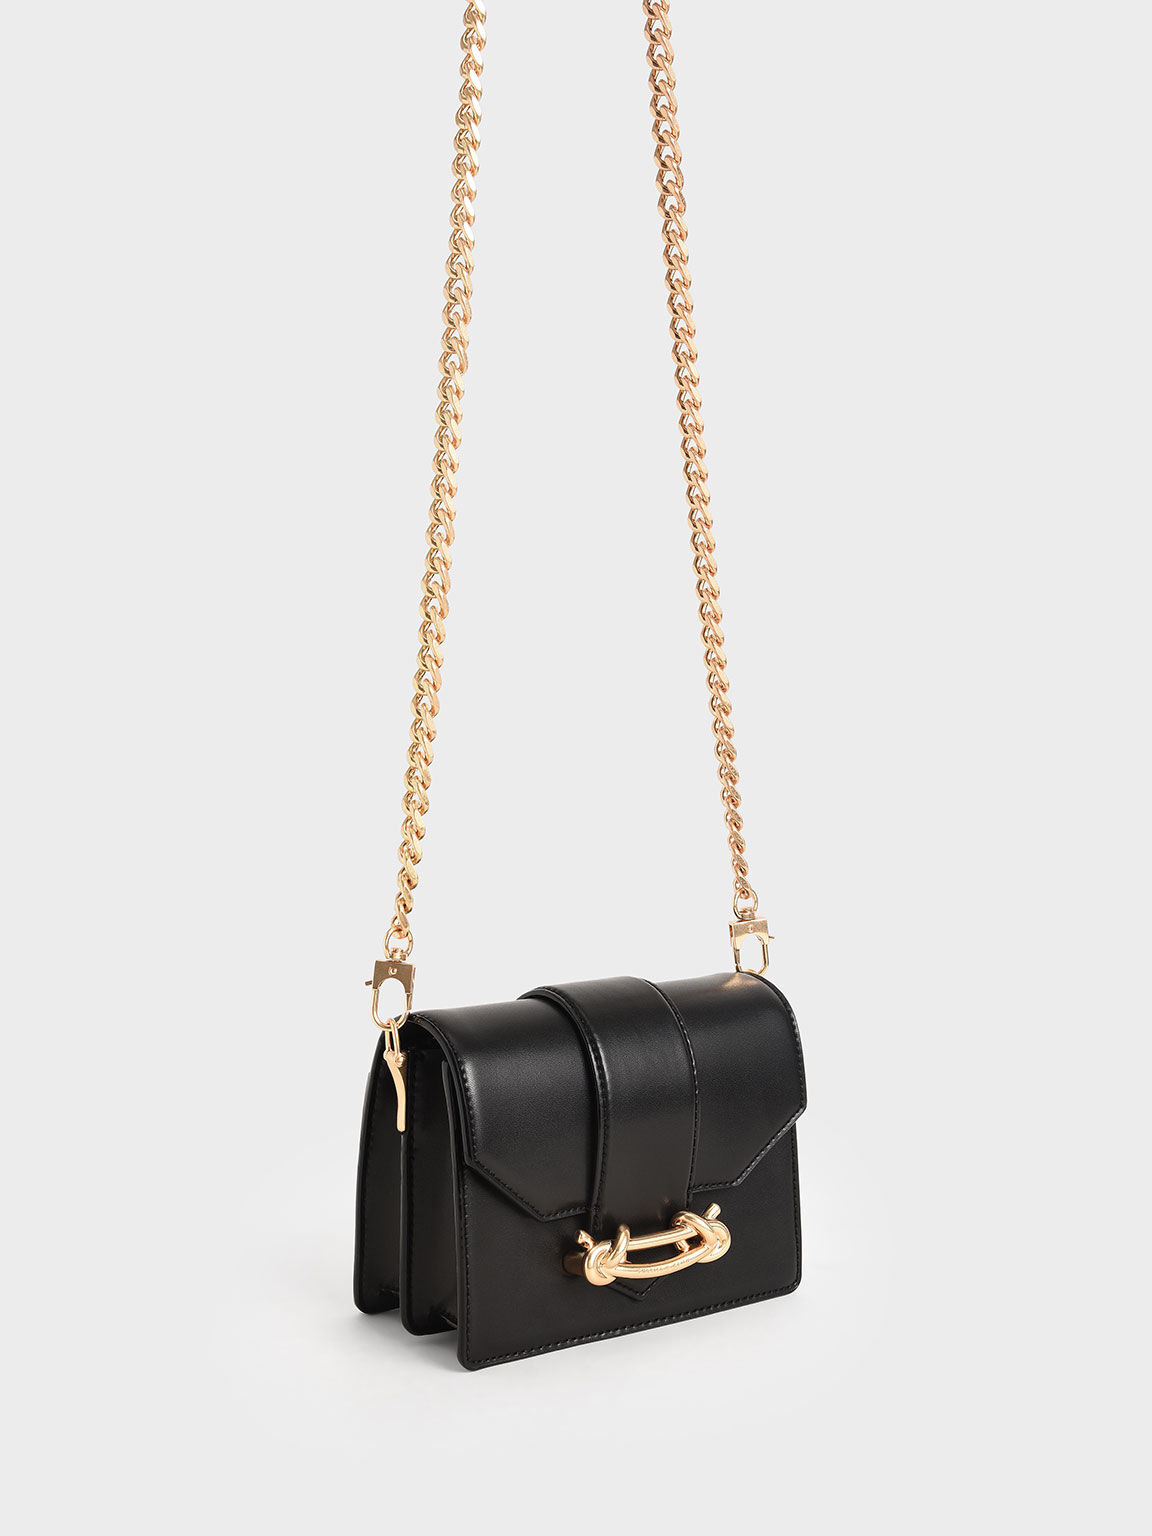 Shop Women’s Bags Online - CHARLES & KEITH SG